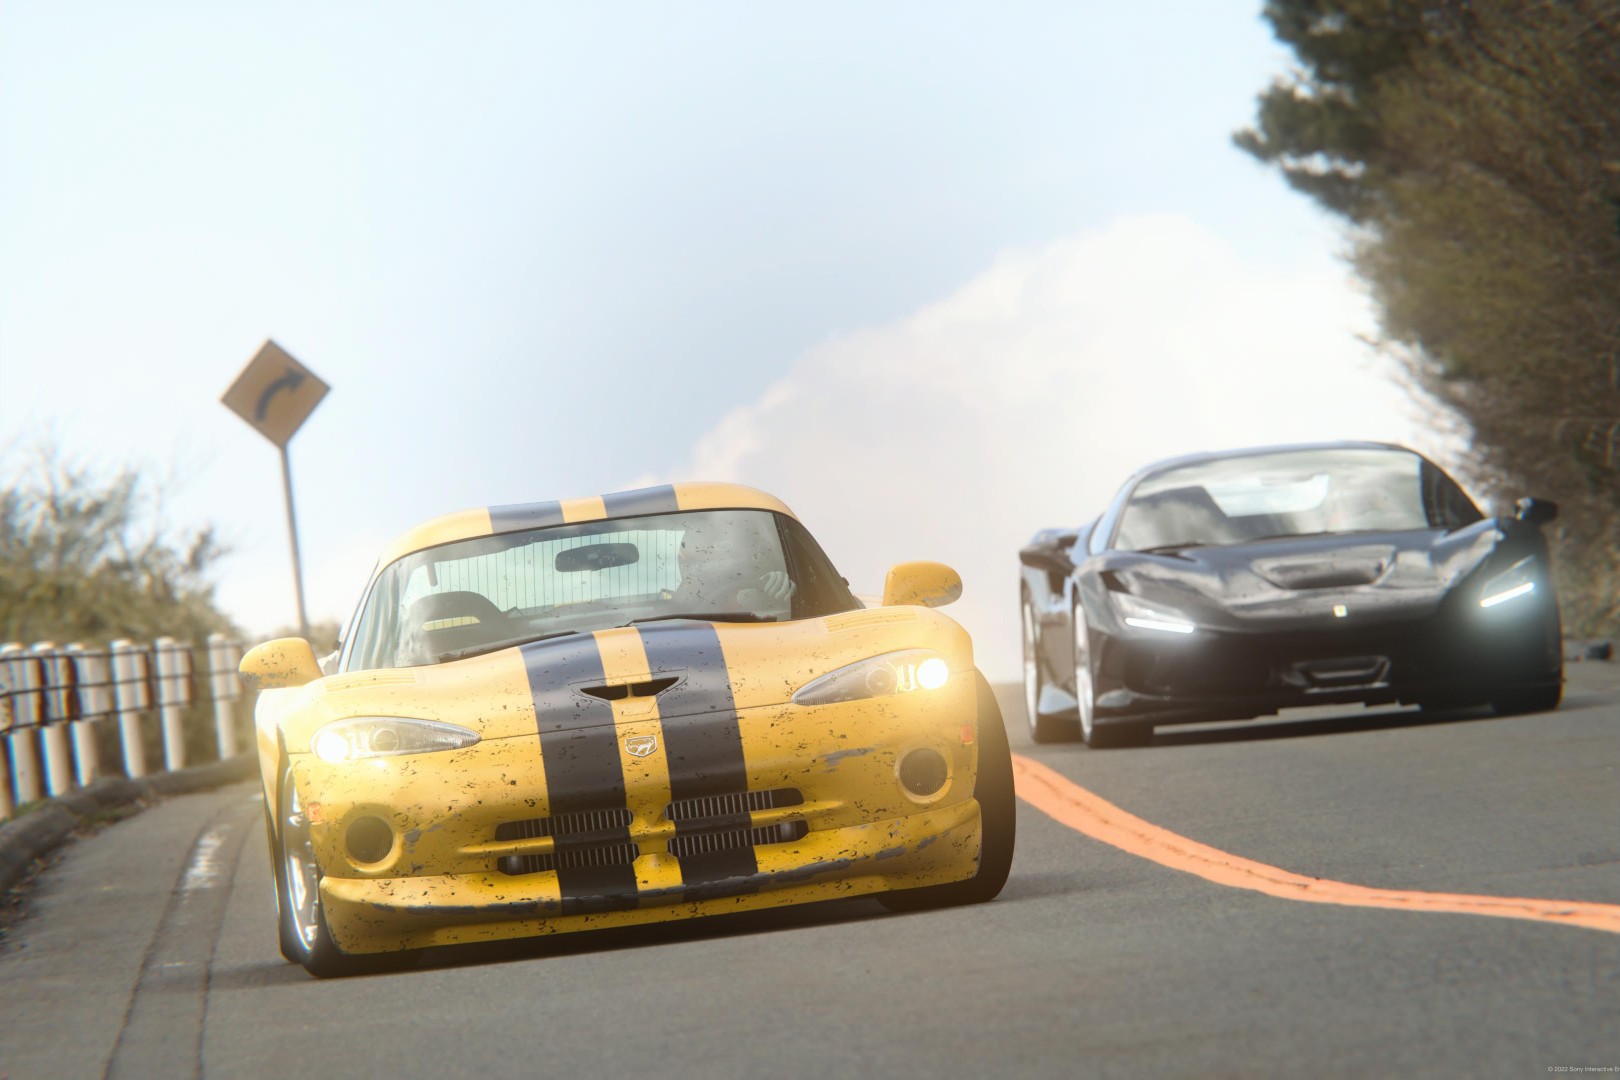 Gran Turismo 7's New Approach to Microtransactions Isn't Going